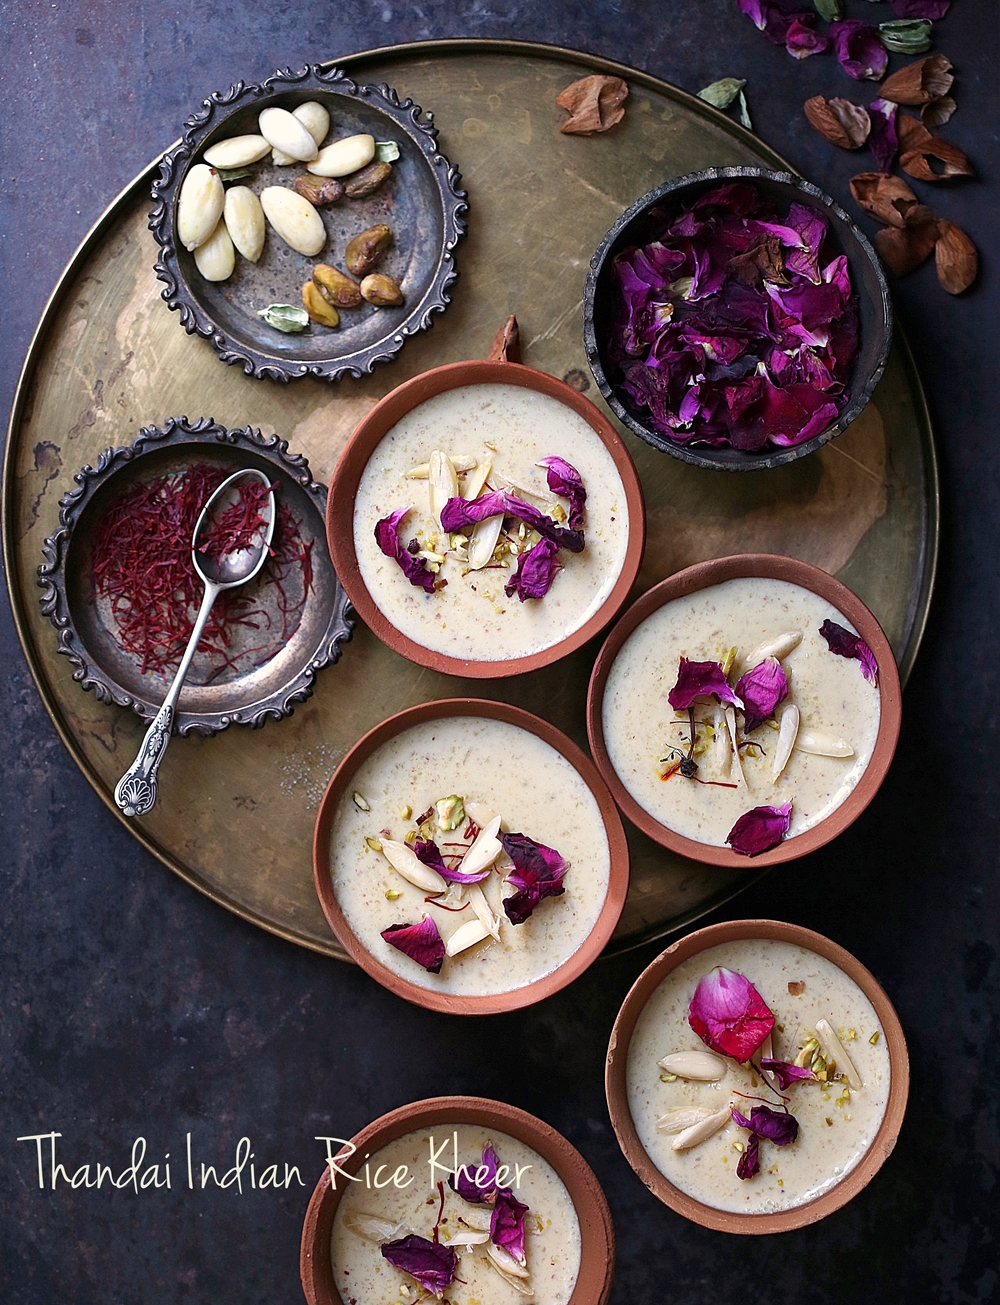 Thandai Indian Rice Kheer ... Holi time of the year - Passionate About Baking